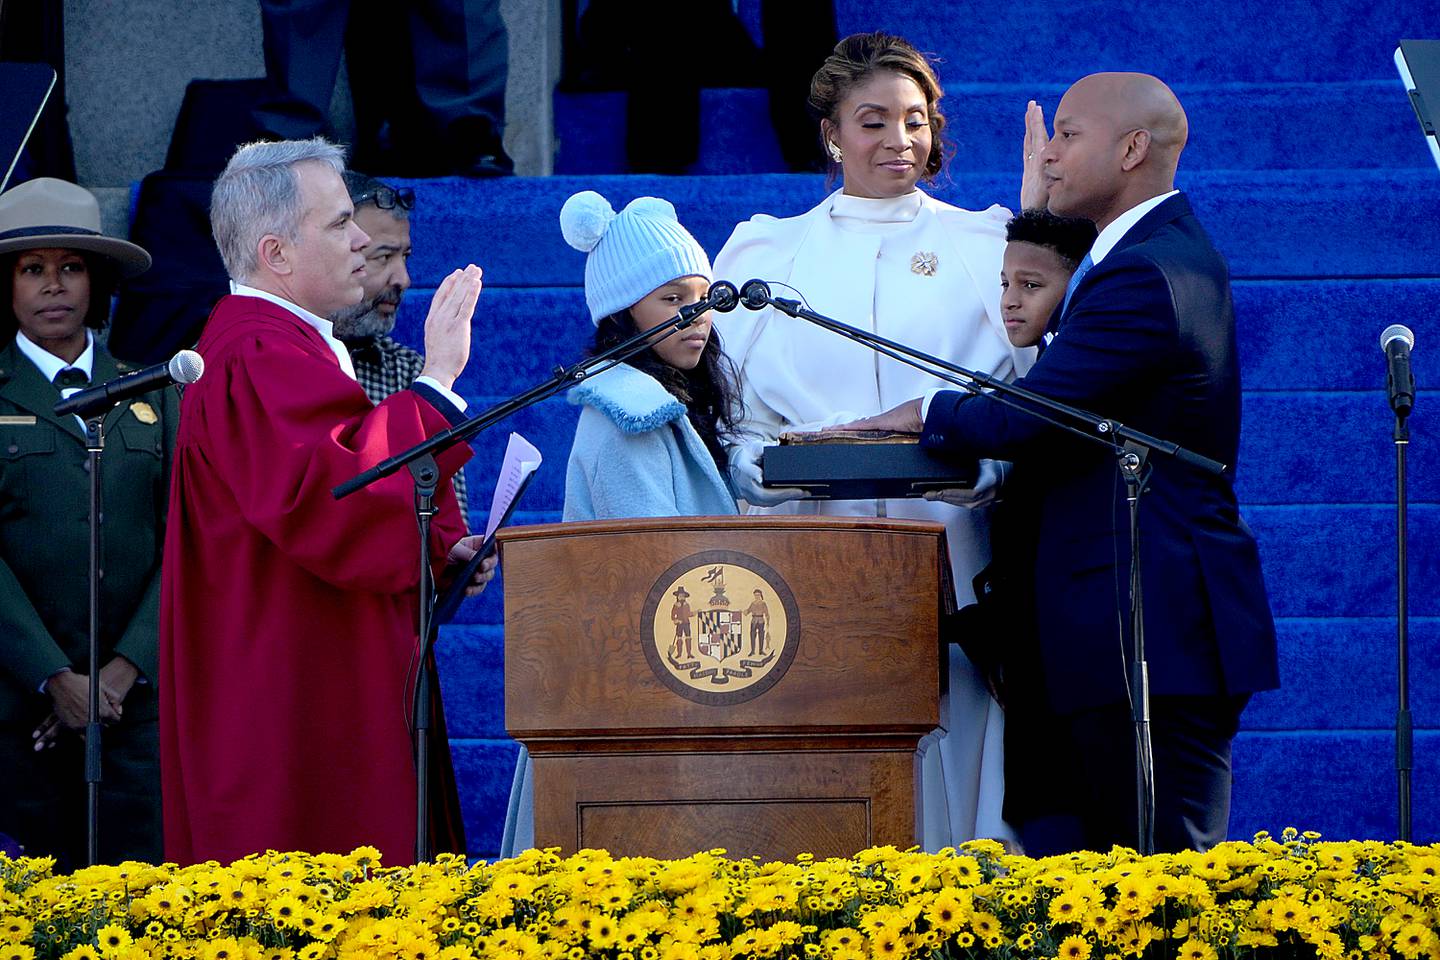 Gov. Wes Moore is sworn into office by Chief Justice Matthew Fader during his inauguration as the First African-American governor for the State of Maryland, at the Maryland State House, in Annapolis, MD, Wednesday, January 18, 2023.